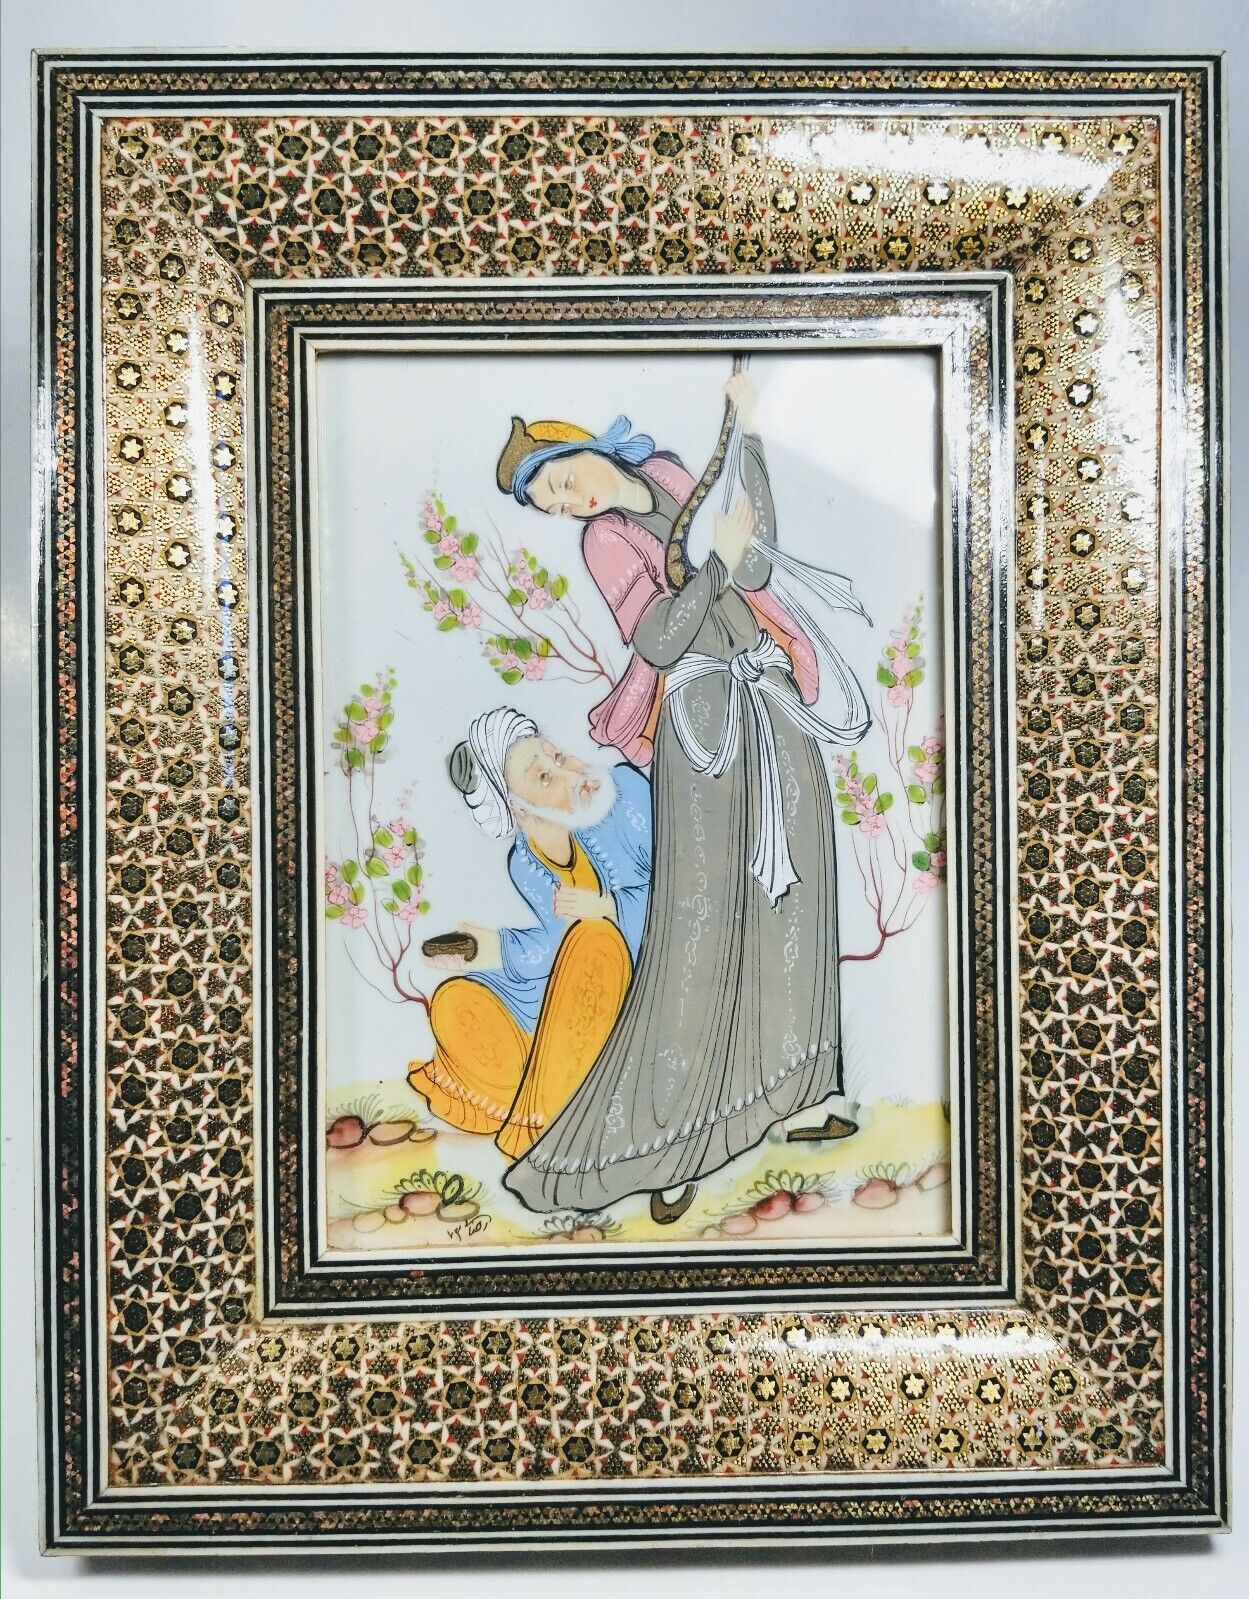 Hand-painted Persian Man And Woman Scene On Celluloid In Mosaic Frame